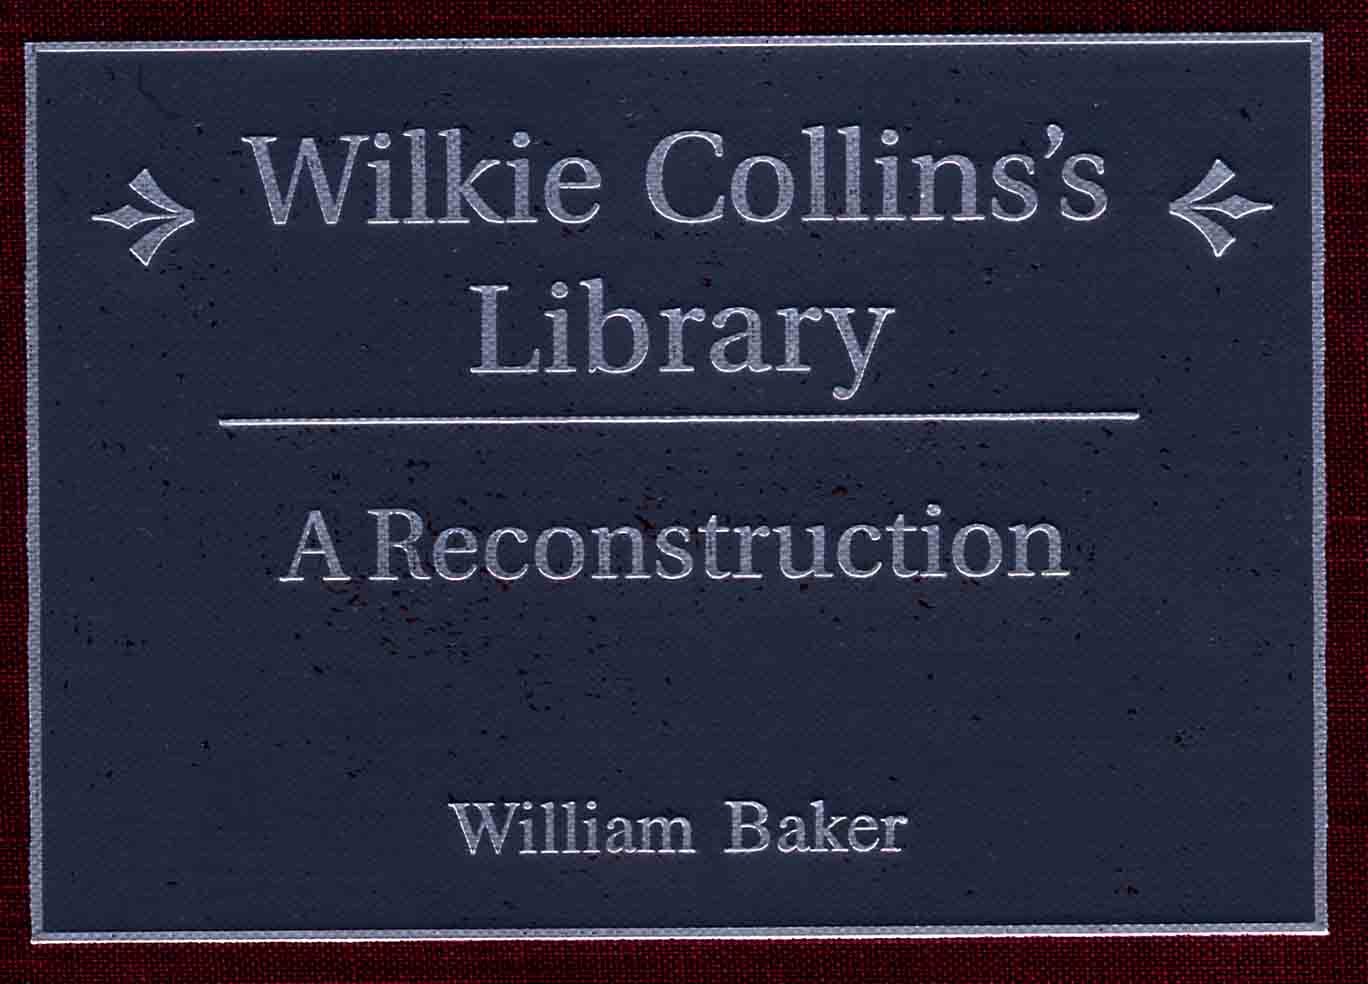 Wilkie Collins's Library - A Reconstruction